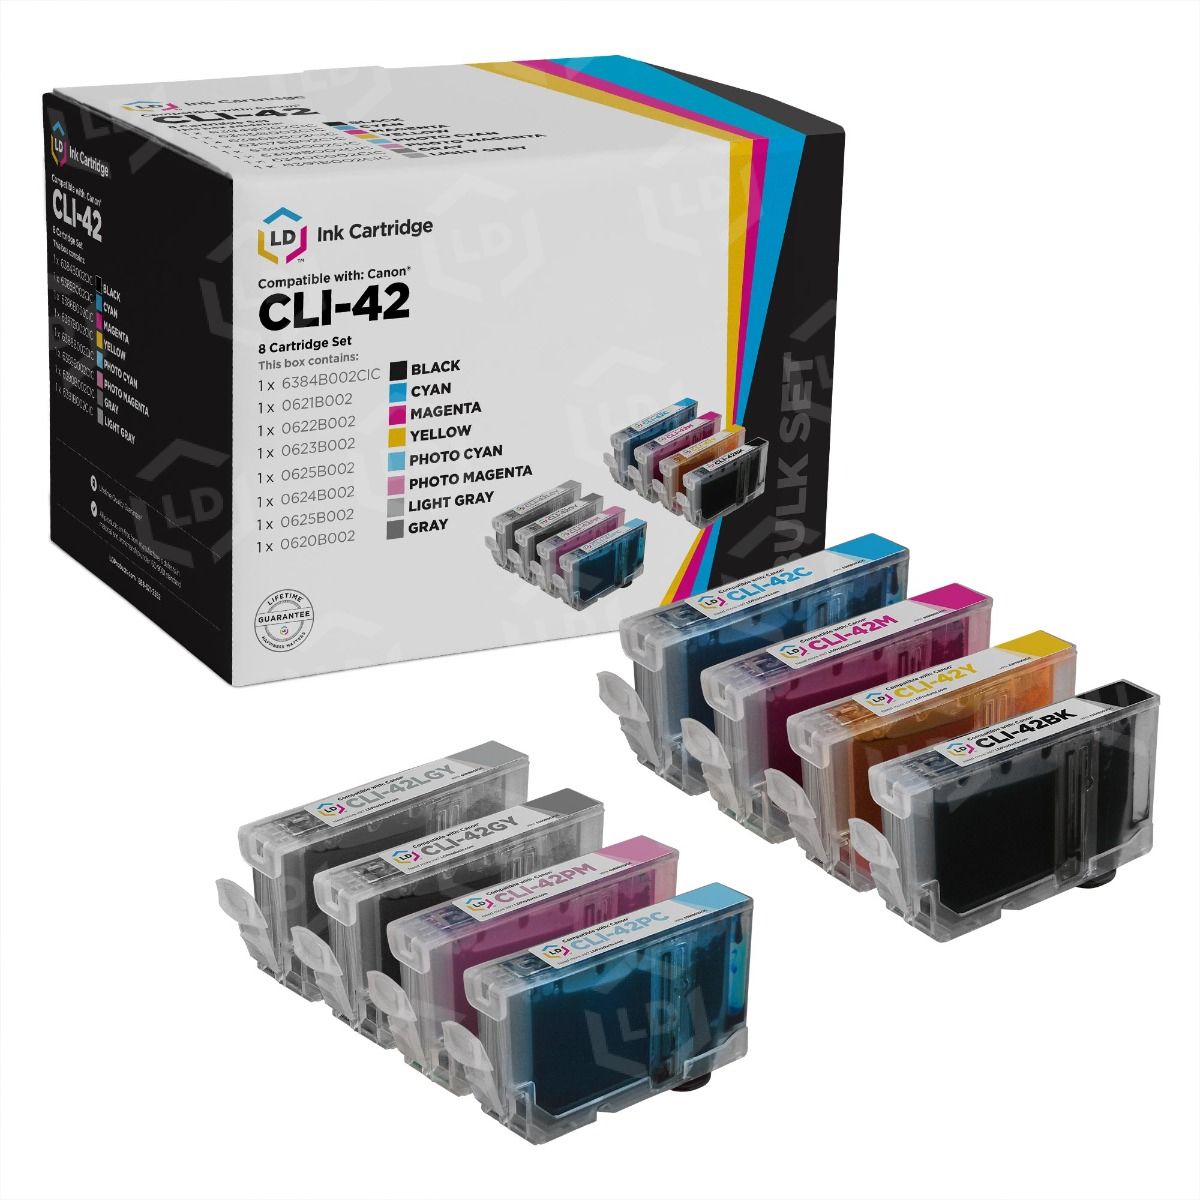 Affordable 8-Cartridge Set For Canon CLI-42 Ink - LD Products